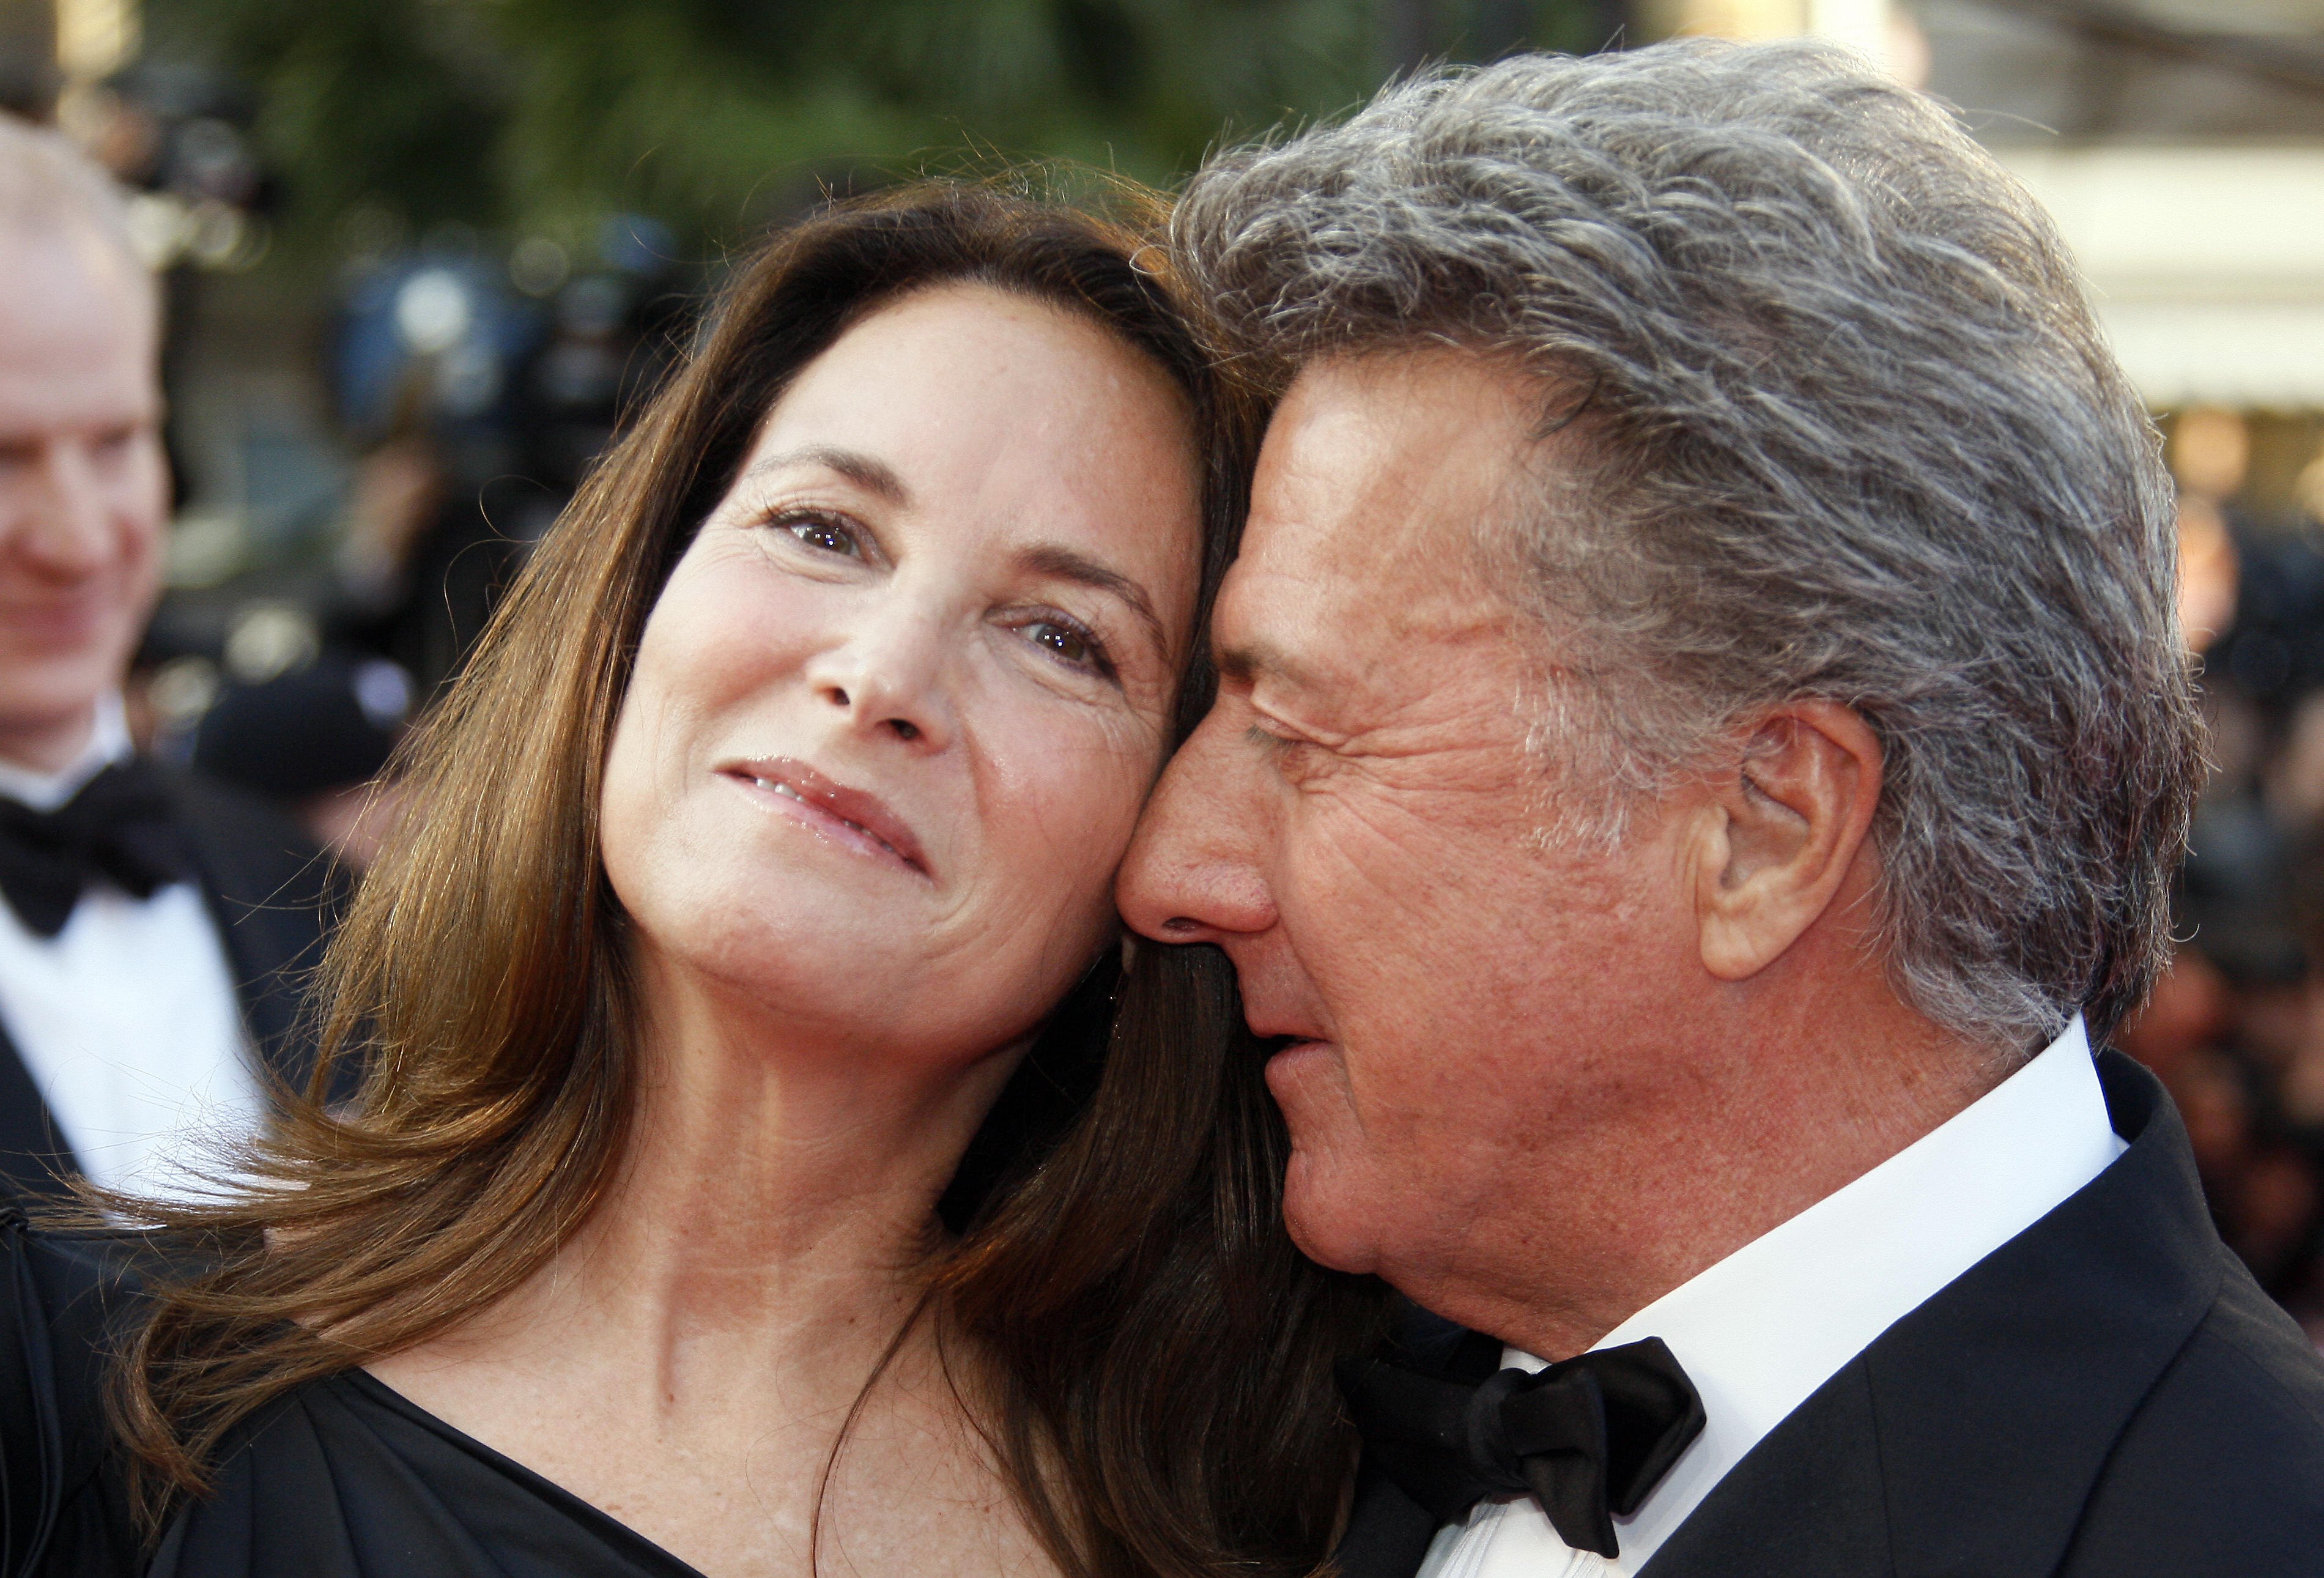 Dustin Hoffman and his wife Lisa Gottsegen pose as they arrive to attend the screening of animated film 